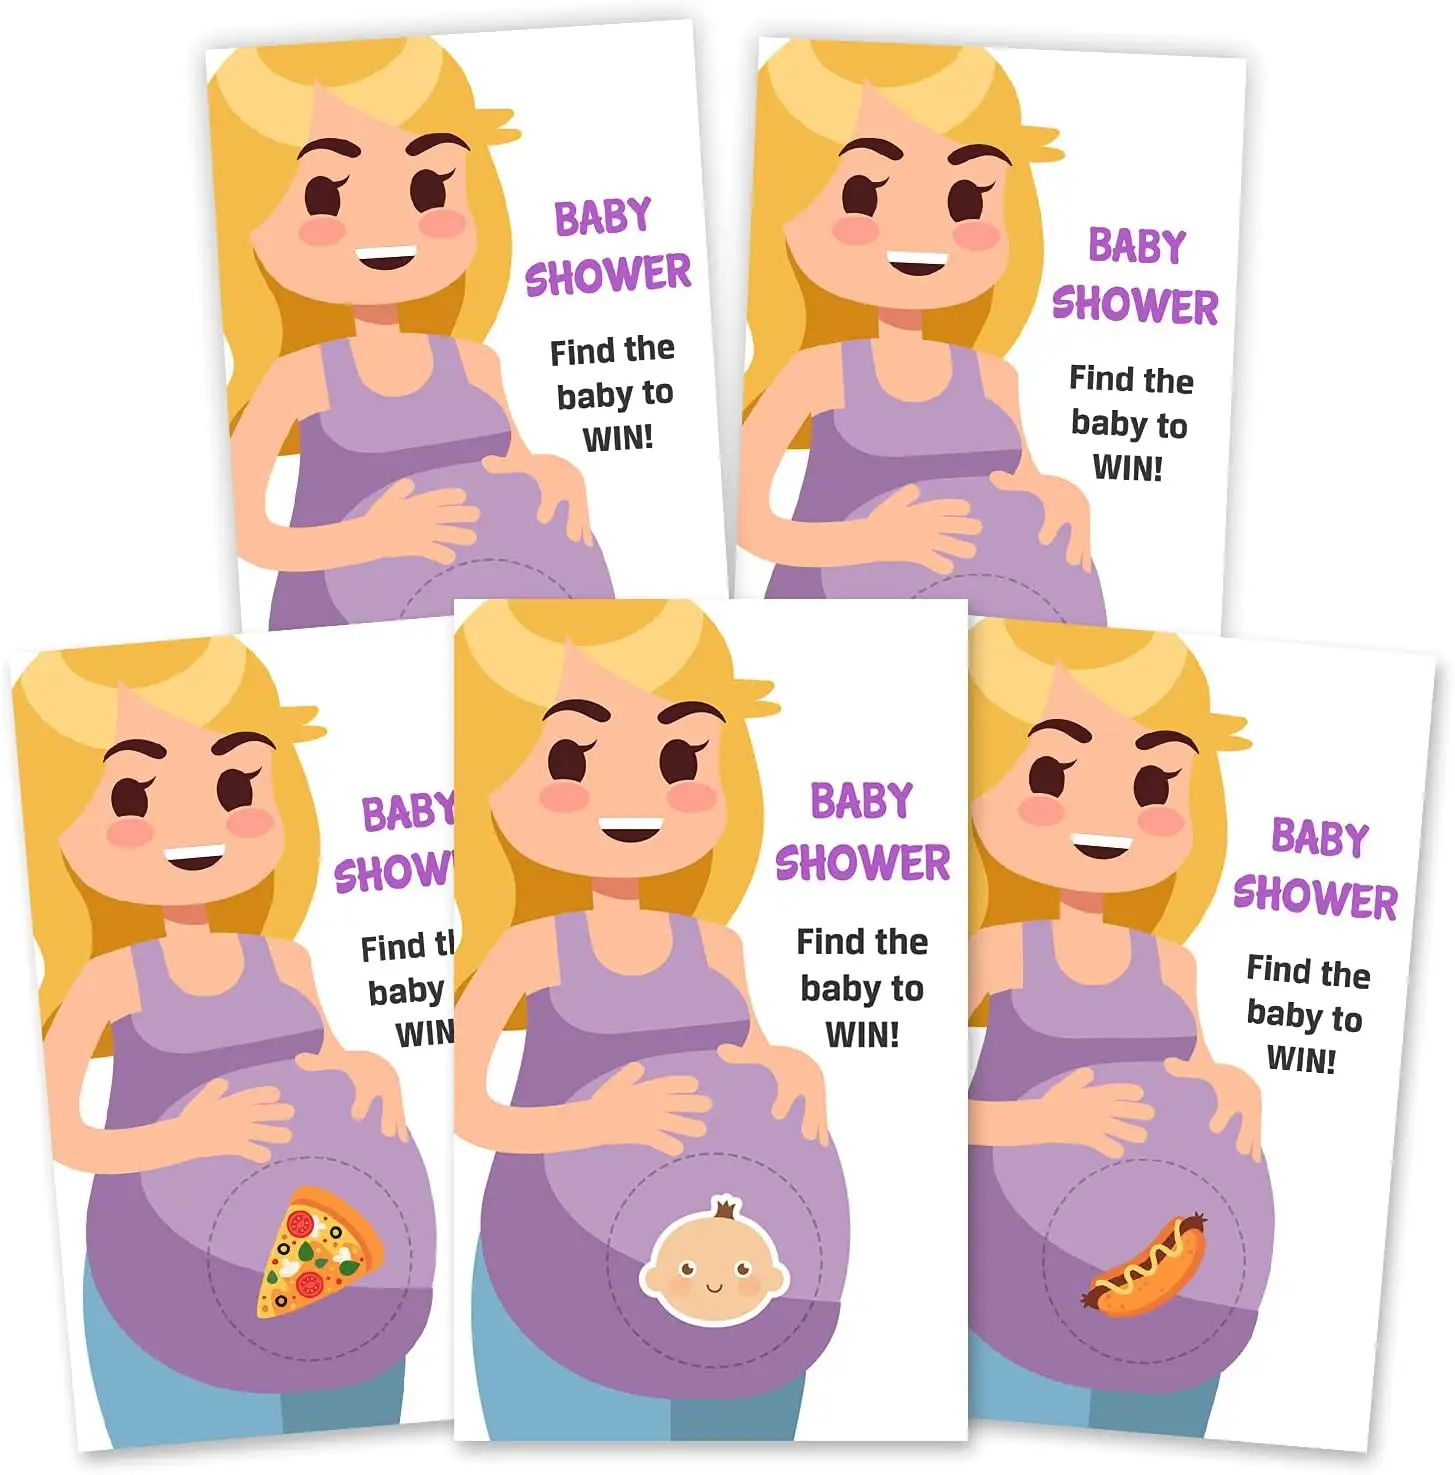 Scratch Off Lottery Ticket Raffle Cards Baby Shower Game - Raffle Tickets 4 Winners Cards and 4 Different Loser Cards Designs